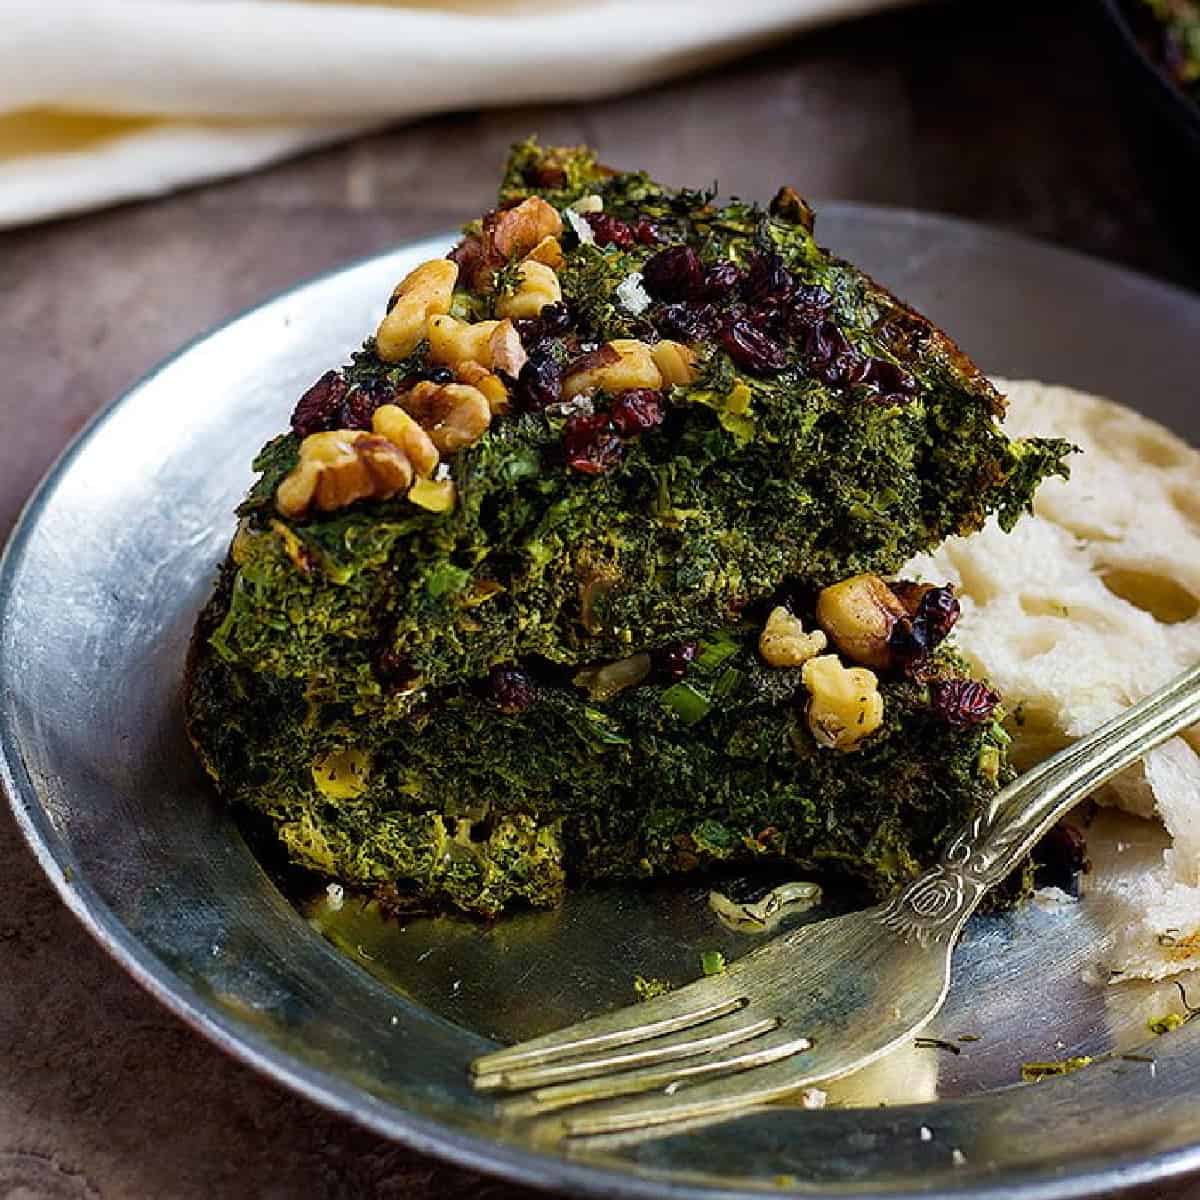 Kuku Sabzi is a Persian Herb Frittata that can be baked in the oven and is topped with barberries and walnuts. It's a great recipe to use up all the herbs!
